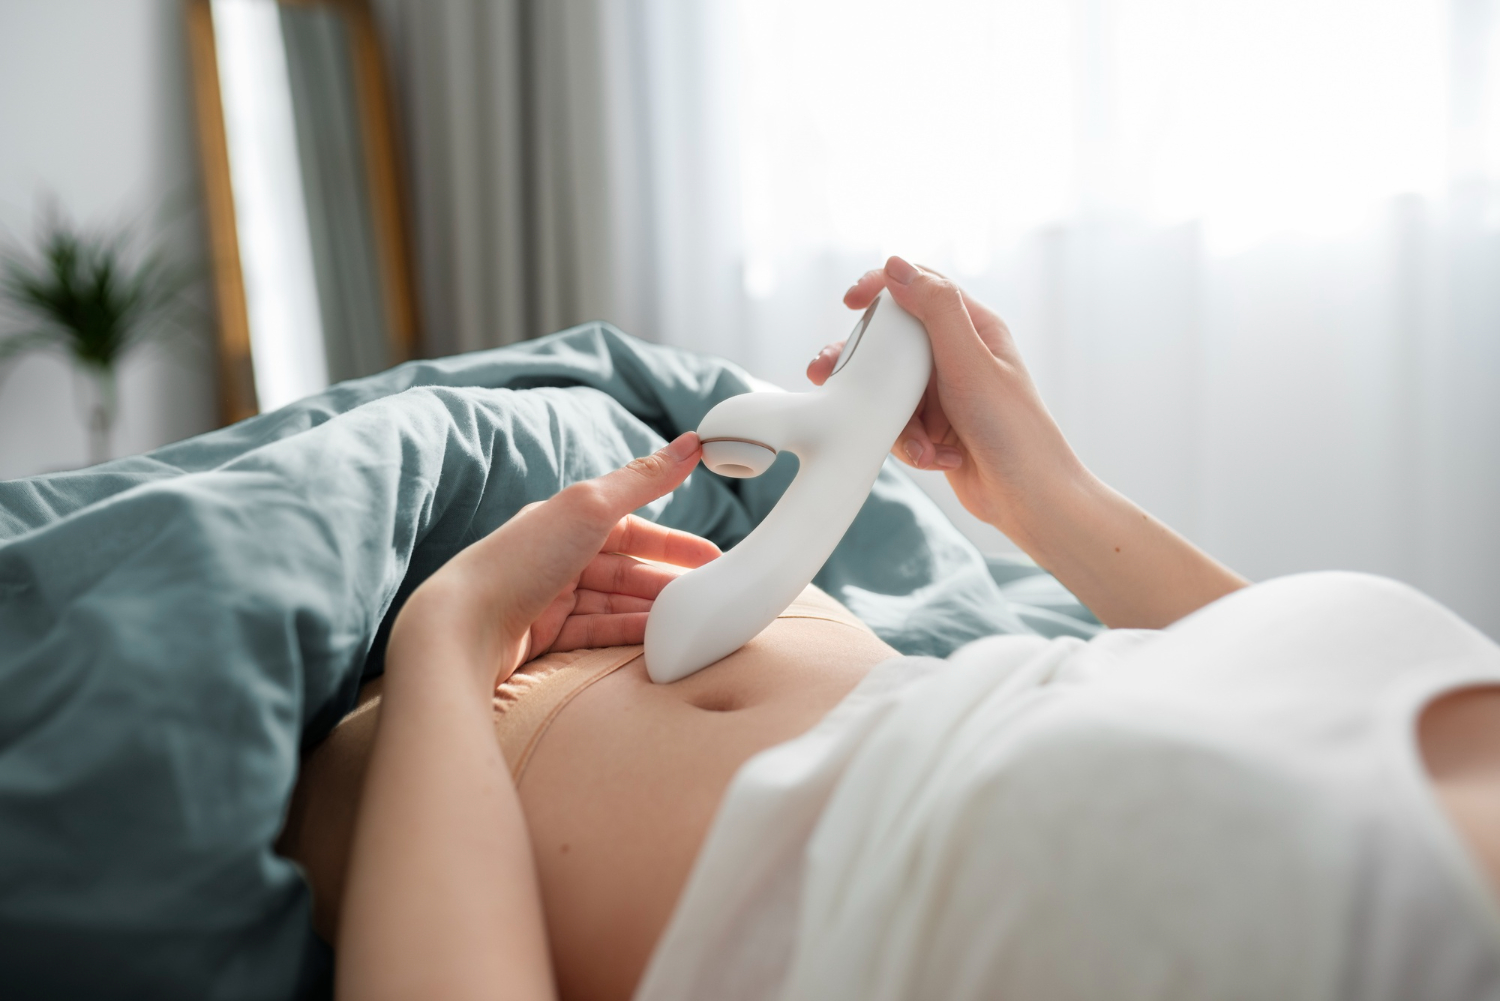 A female in the bed with a white rabbit vibrator in her hands.